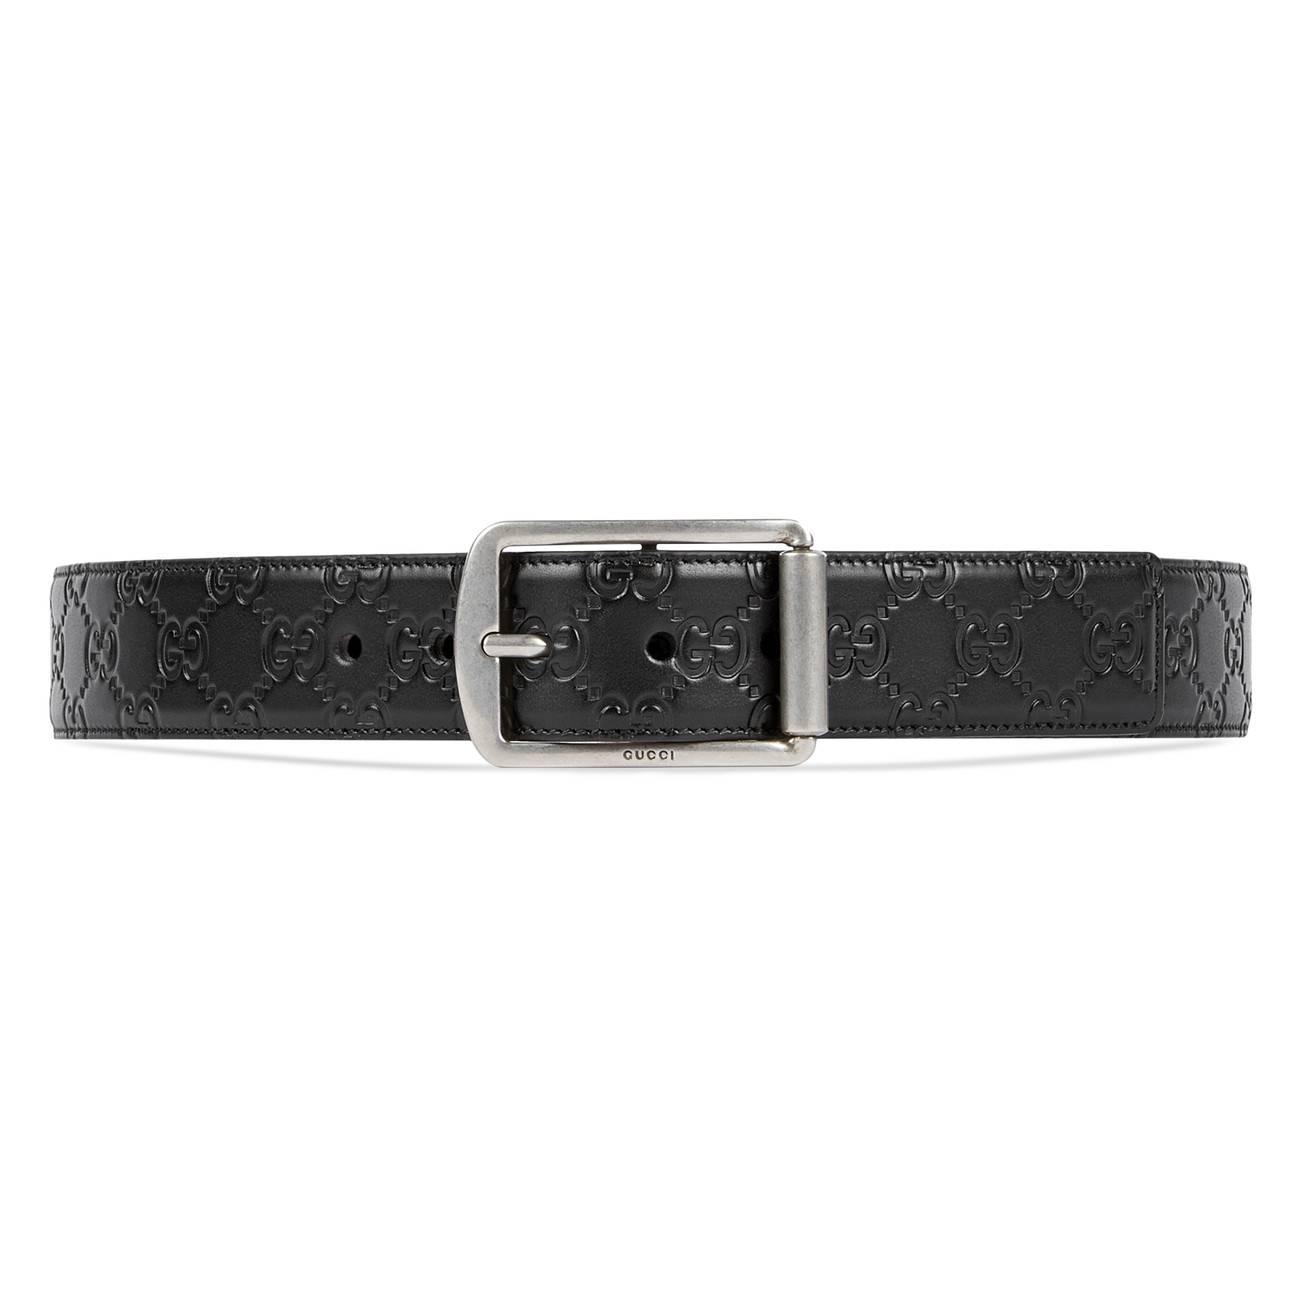 Gucci Signature Leather Belt in Black for Men - Lyst